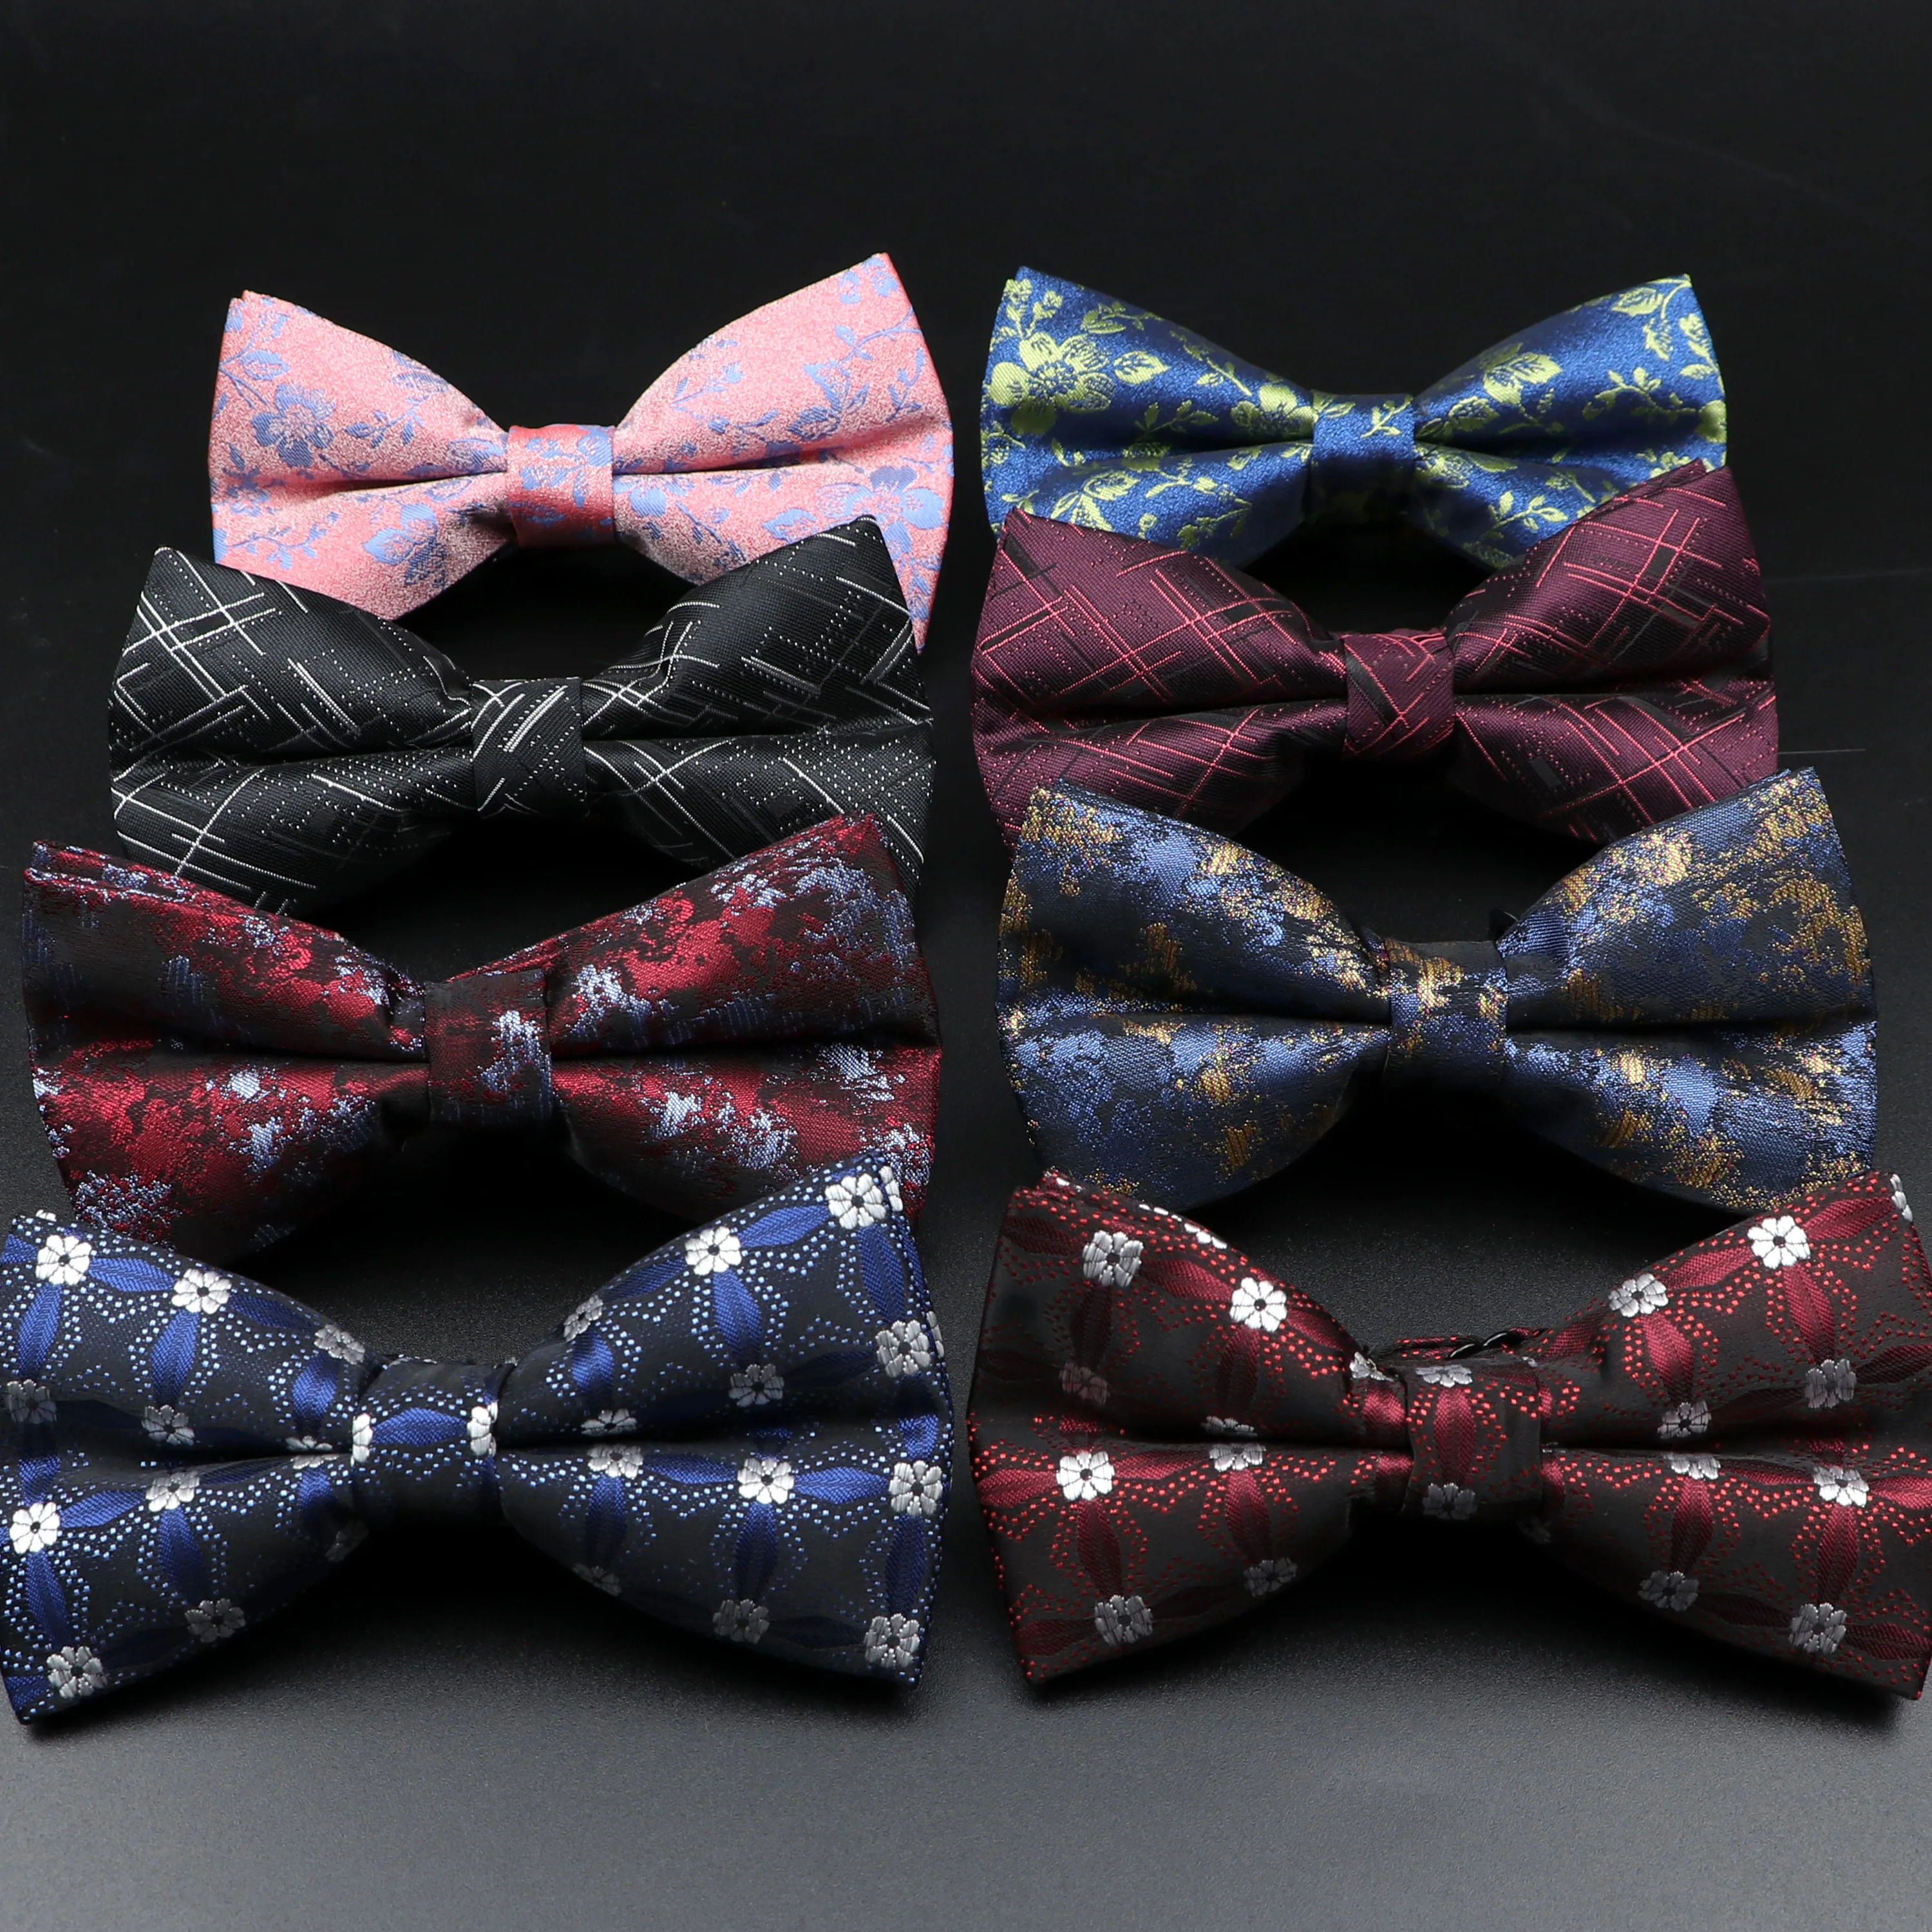 Men Bowtie New Butterfly Knot Luxurious Bow Tie Black Red Dot Floral Cravat Formal Suit Wedding Ceremony Ties Accessories Gift